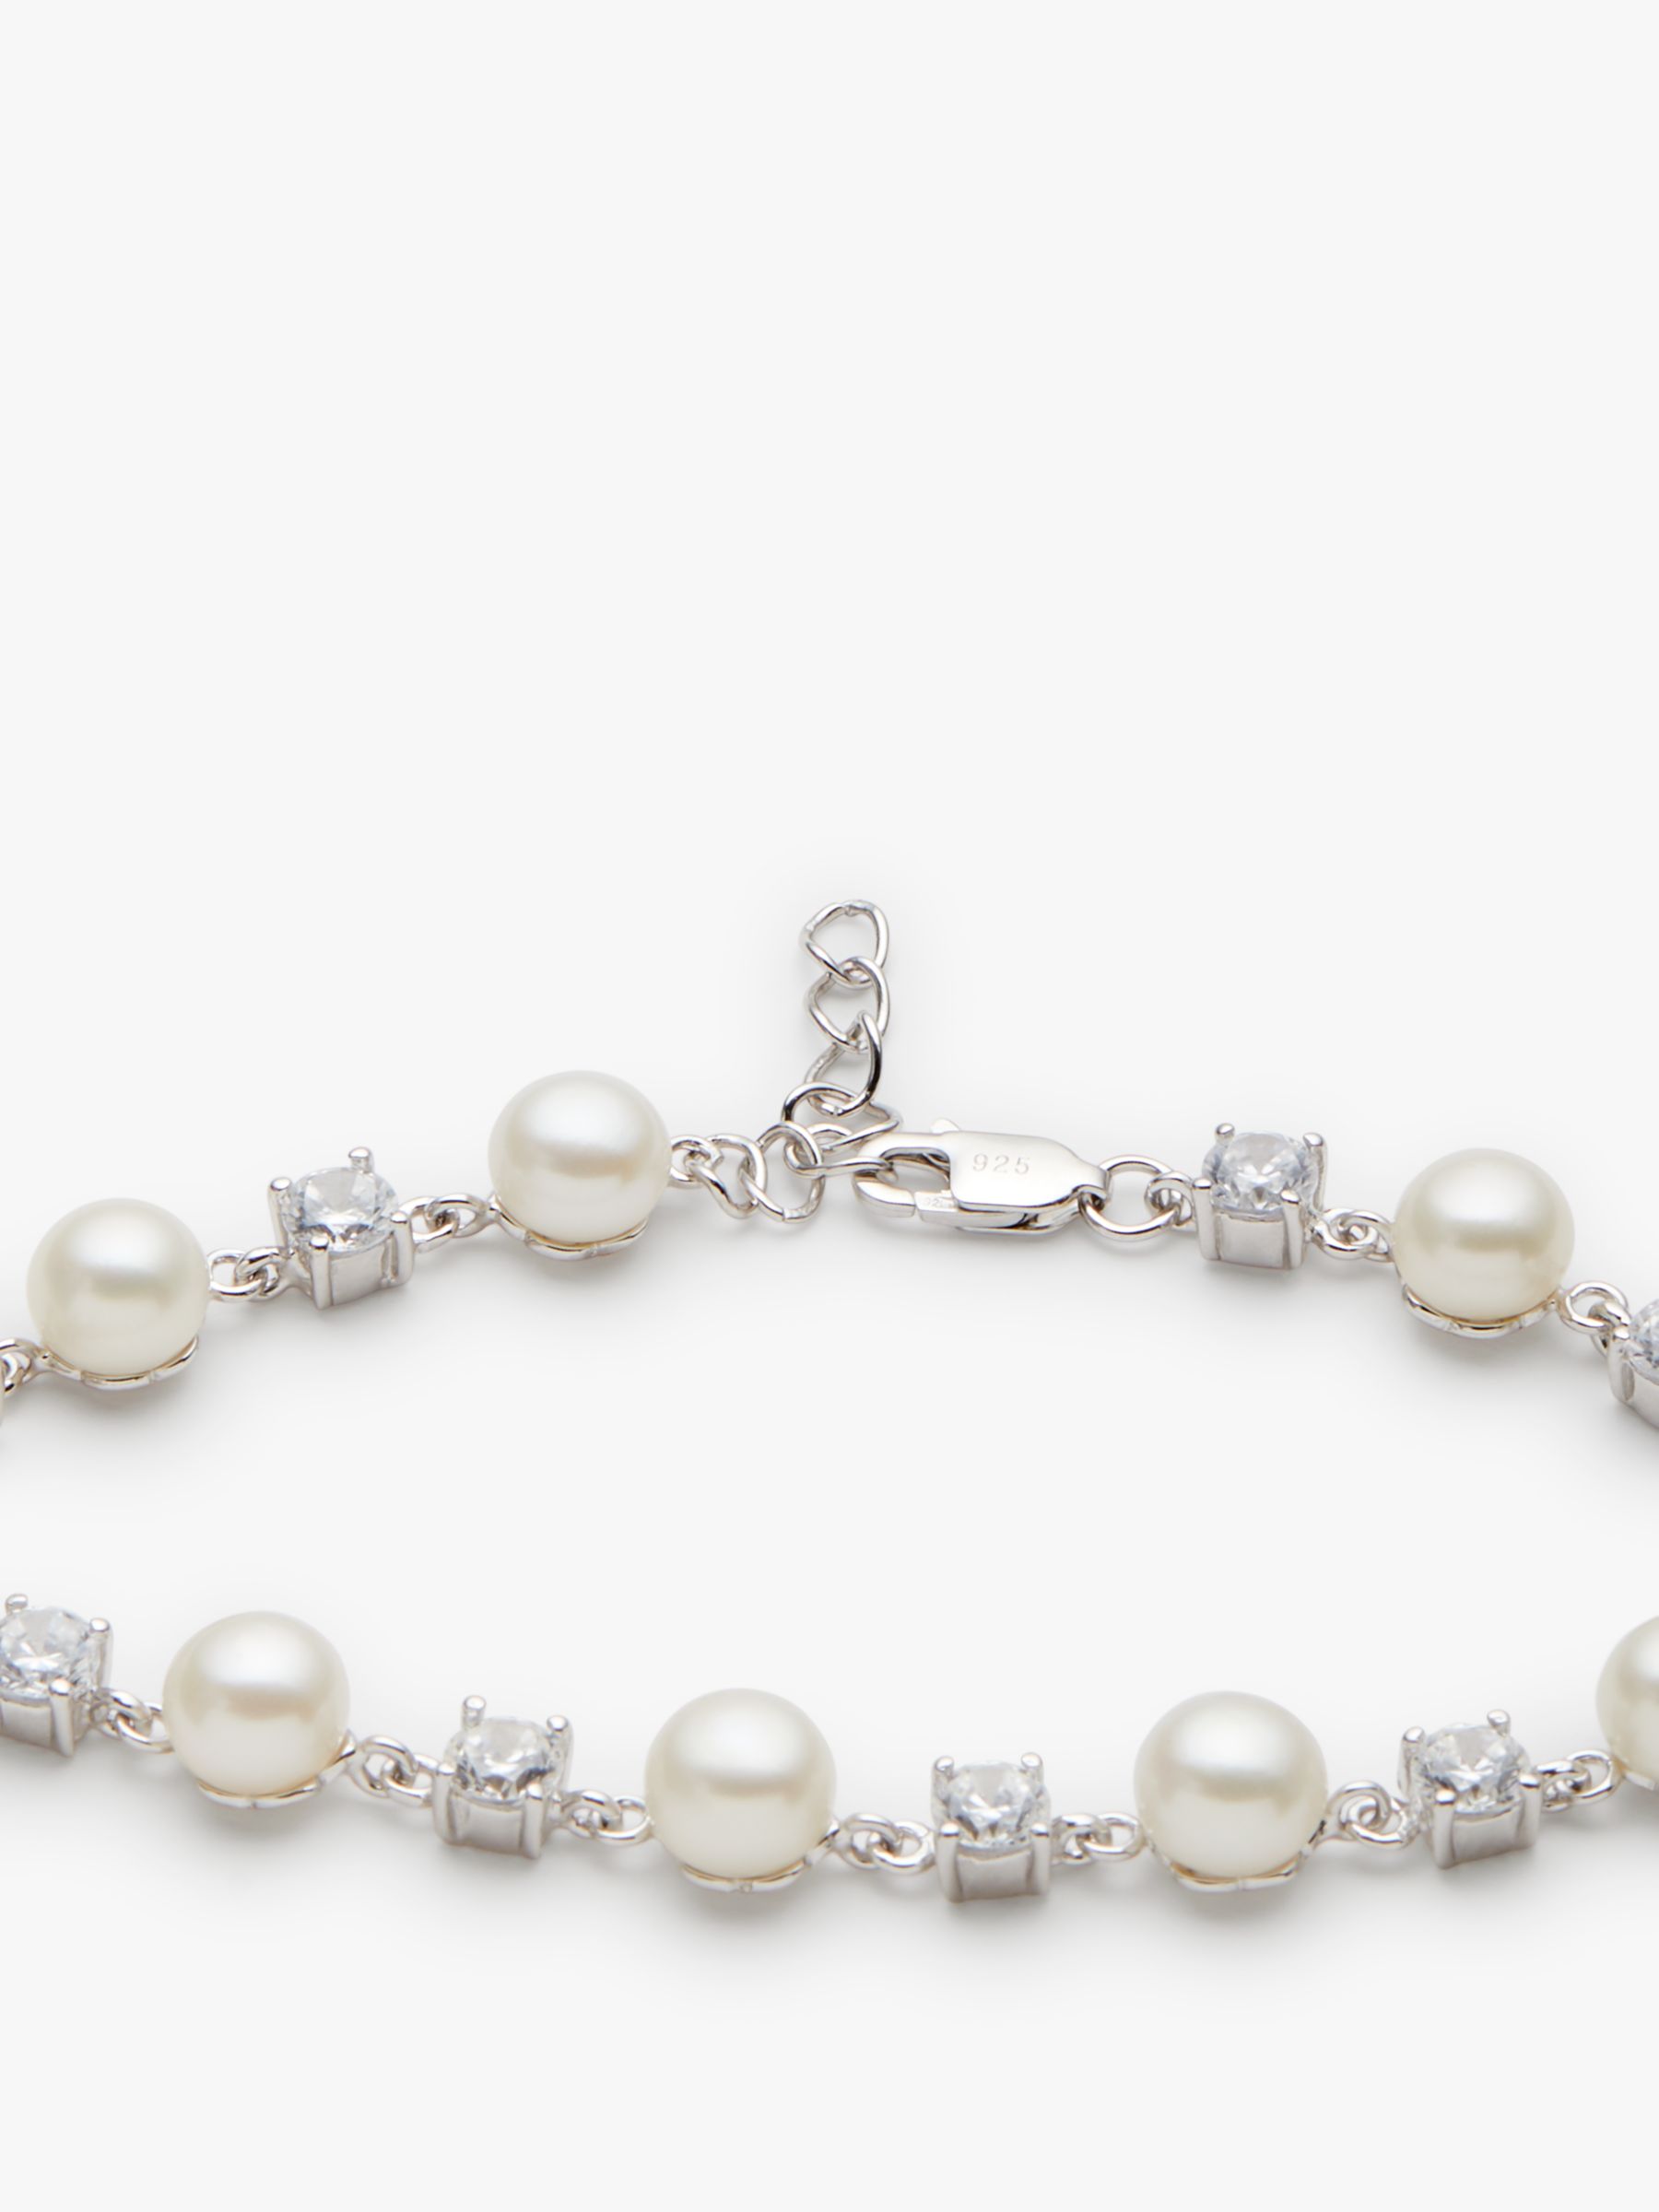 Buy Lido Pearl and Cubic Zirconia Spacer Bracelet, Silver/White Online at johnlewis.com